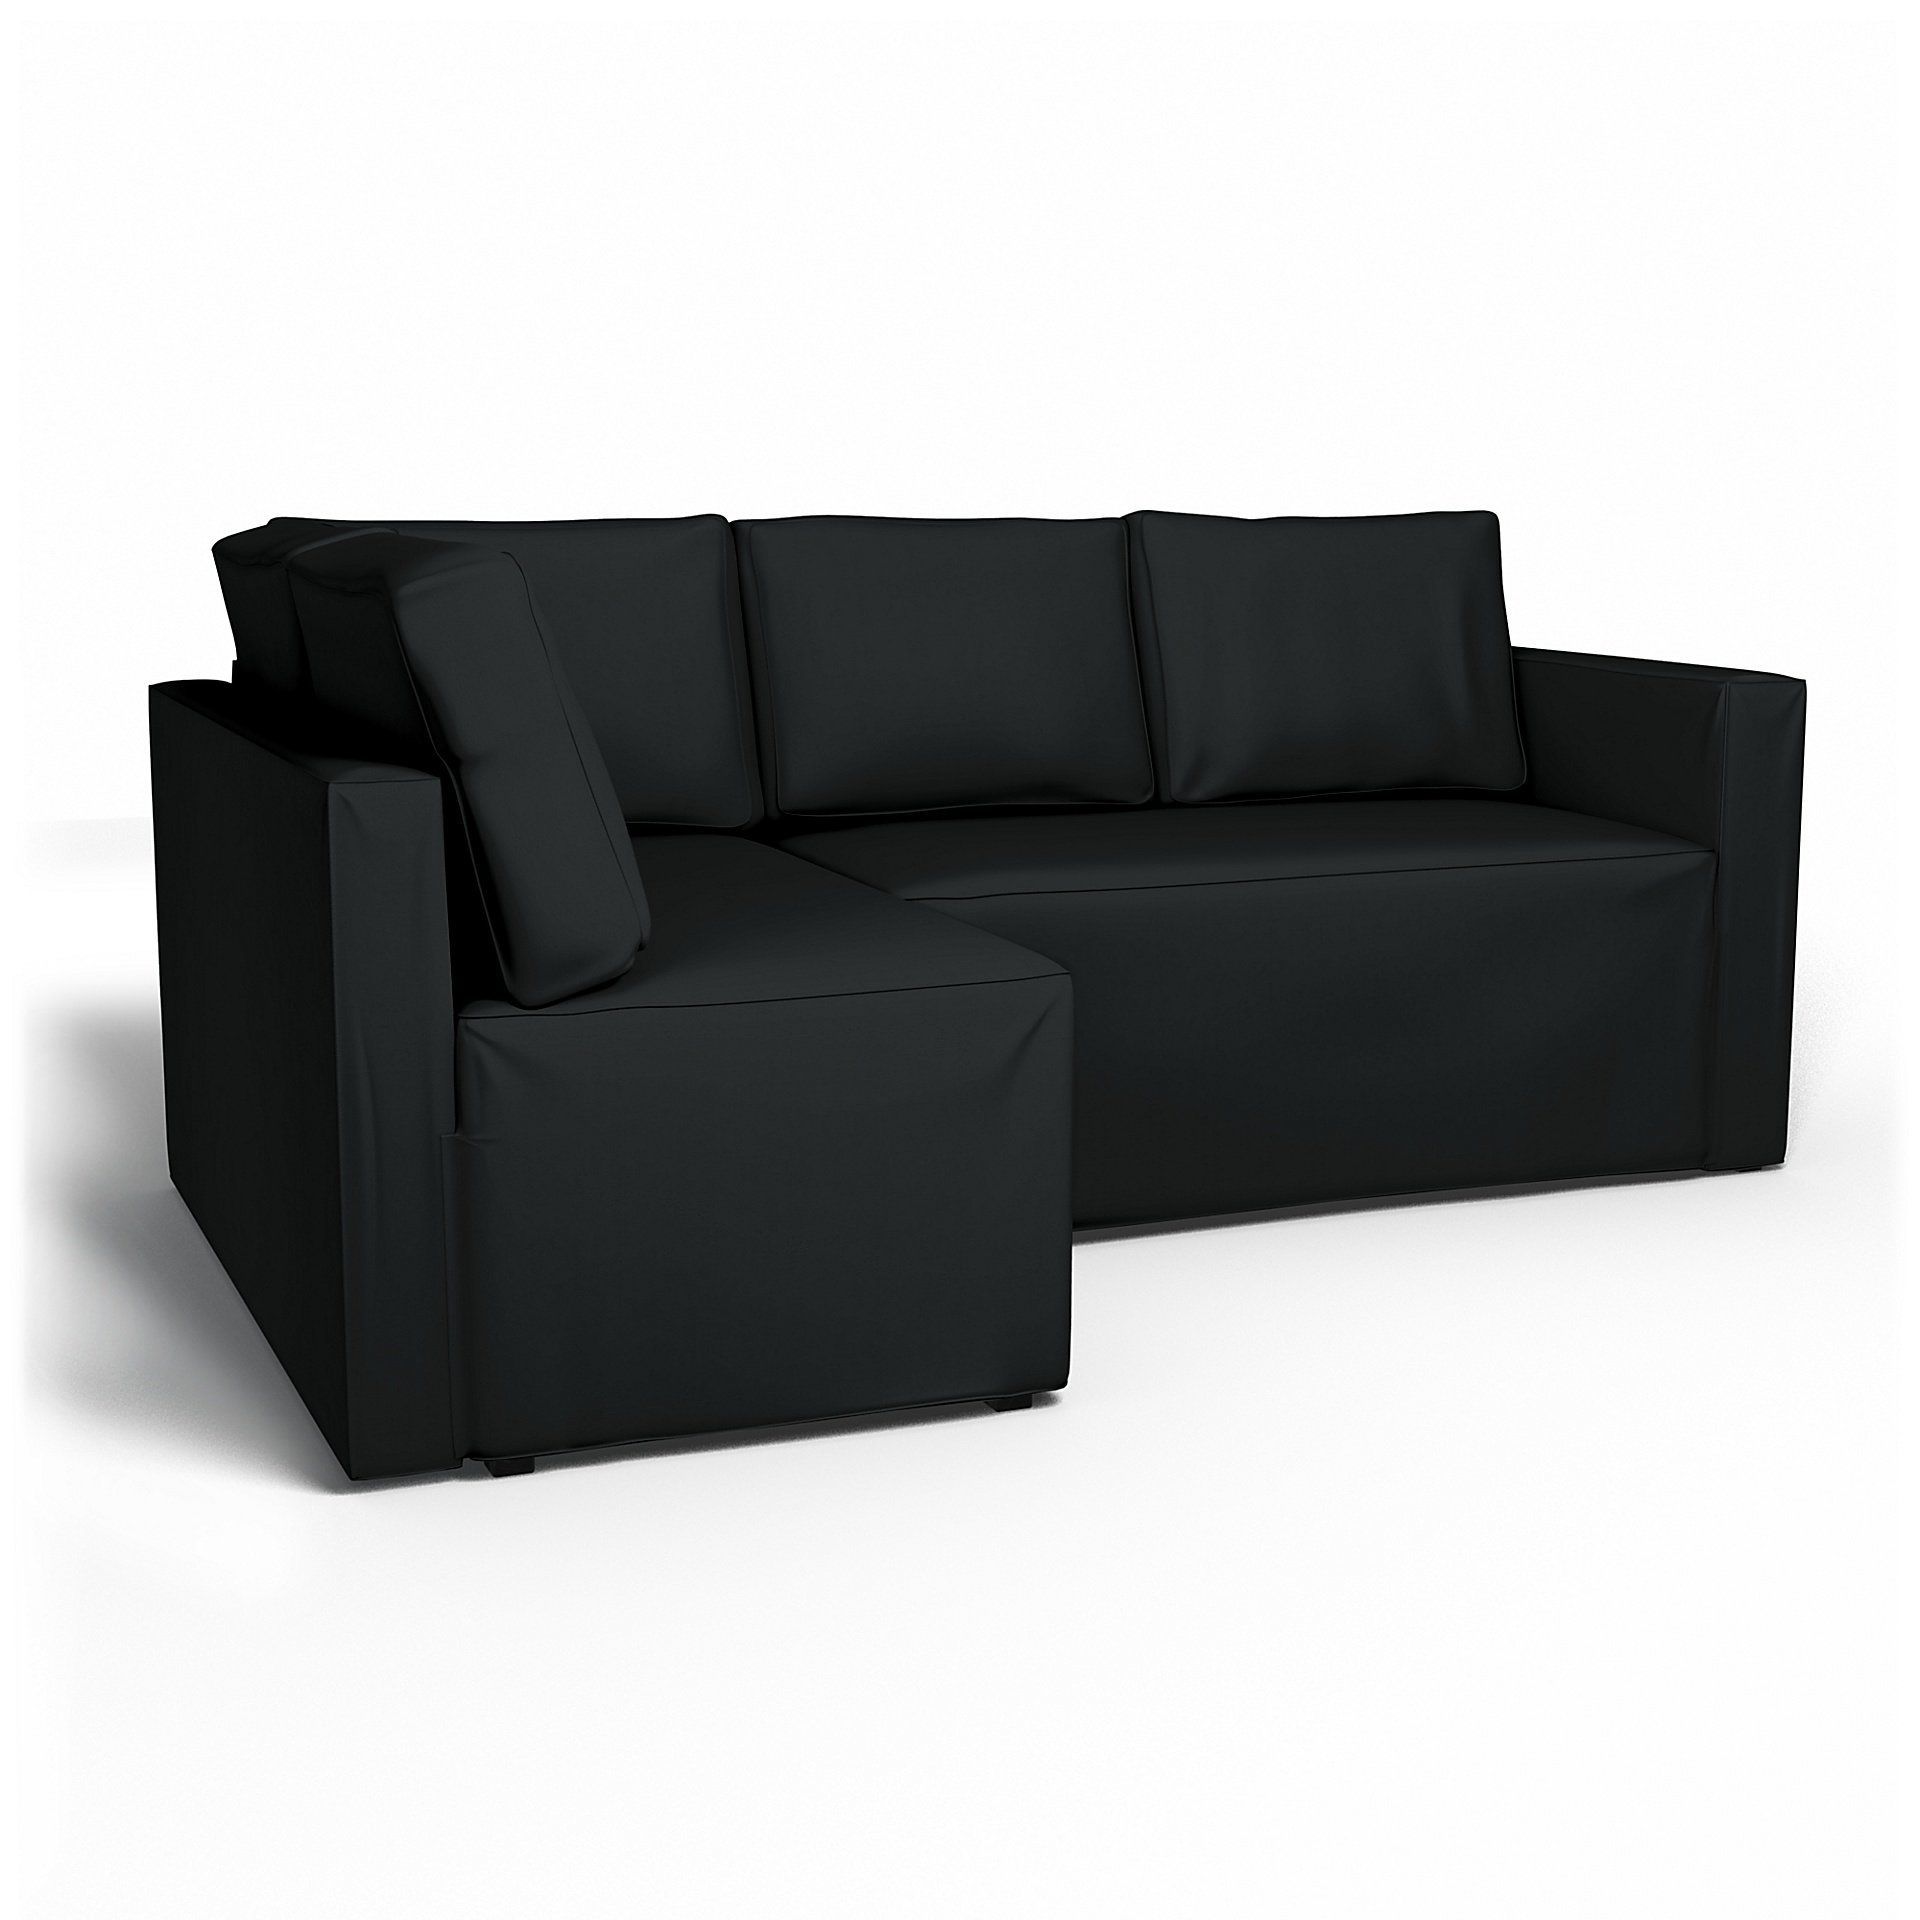 IKEA - Fagelbo Sofa Bed with Left Chaise Cover, Jet Black, Cotton - Bemz